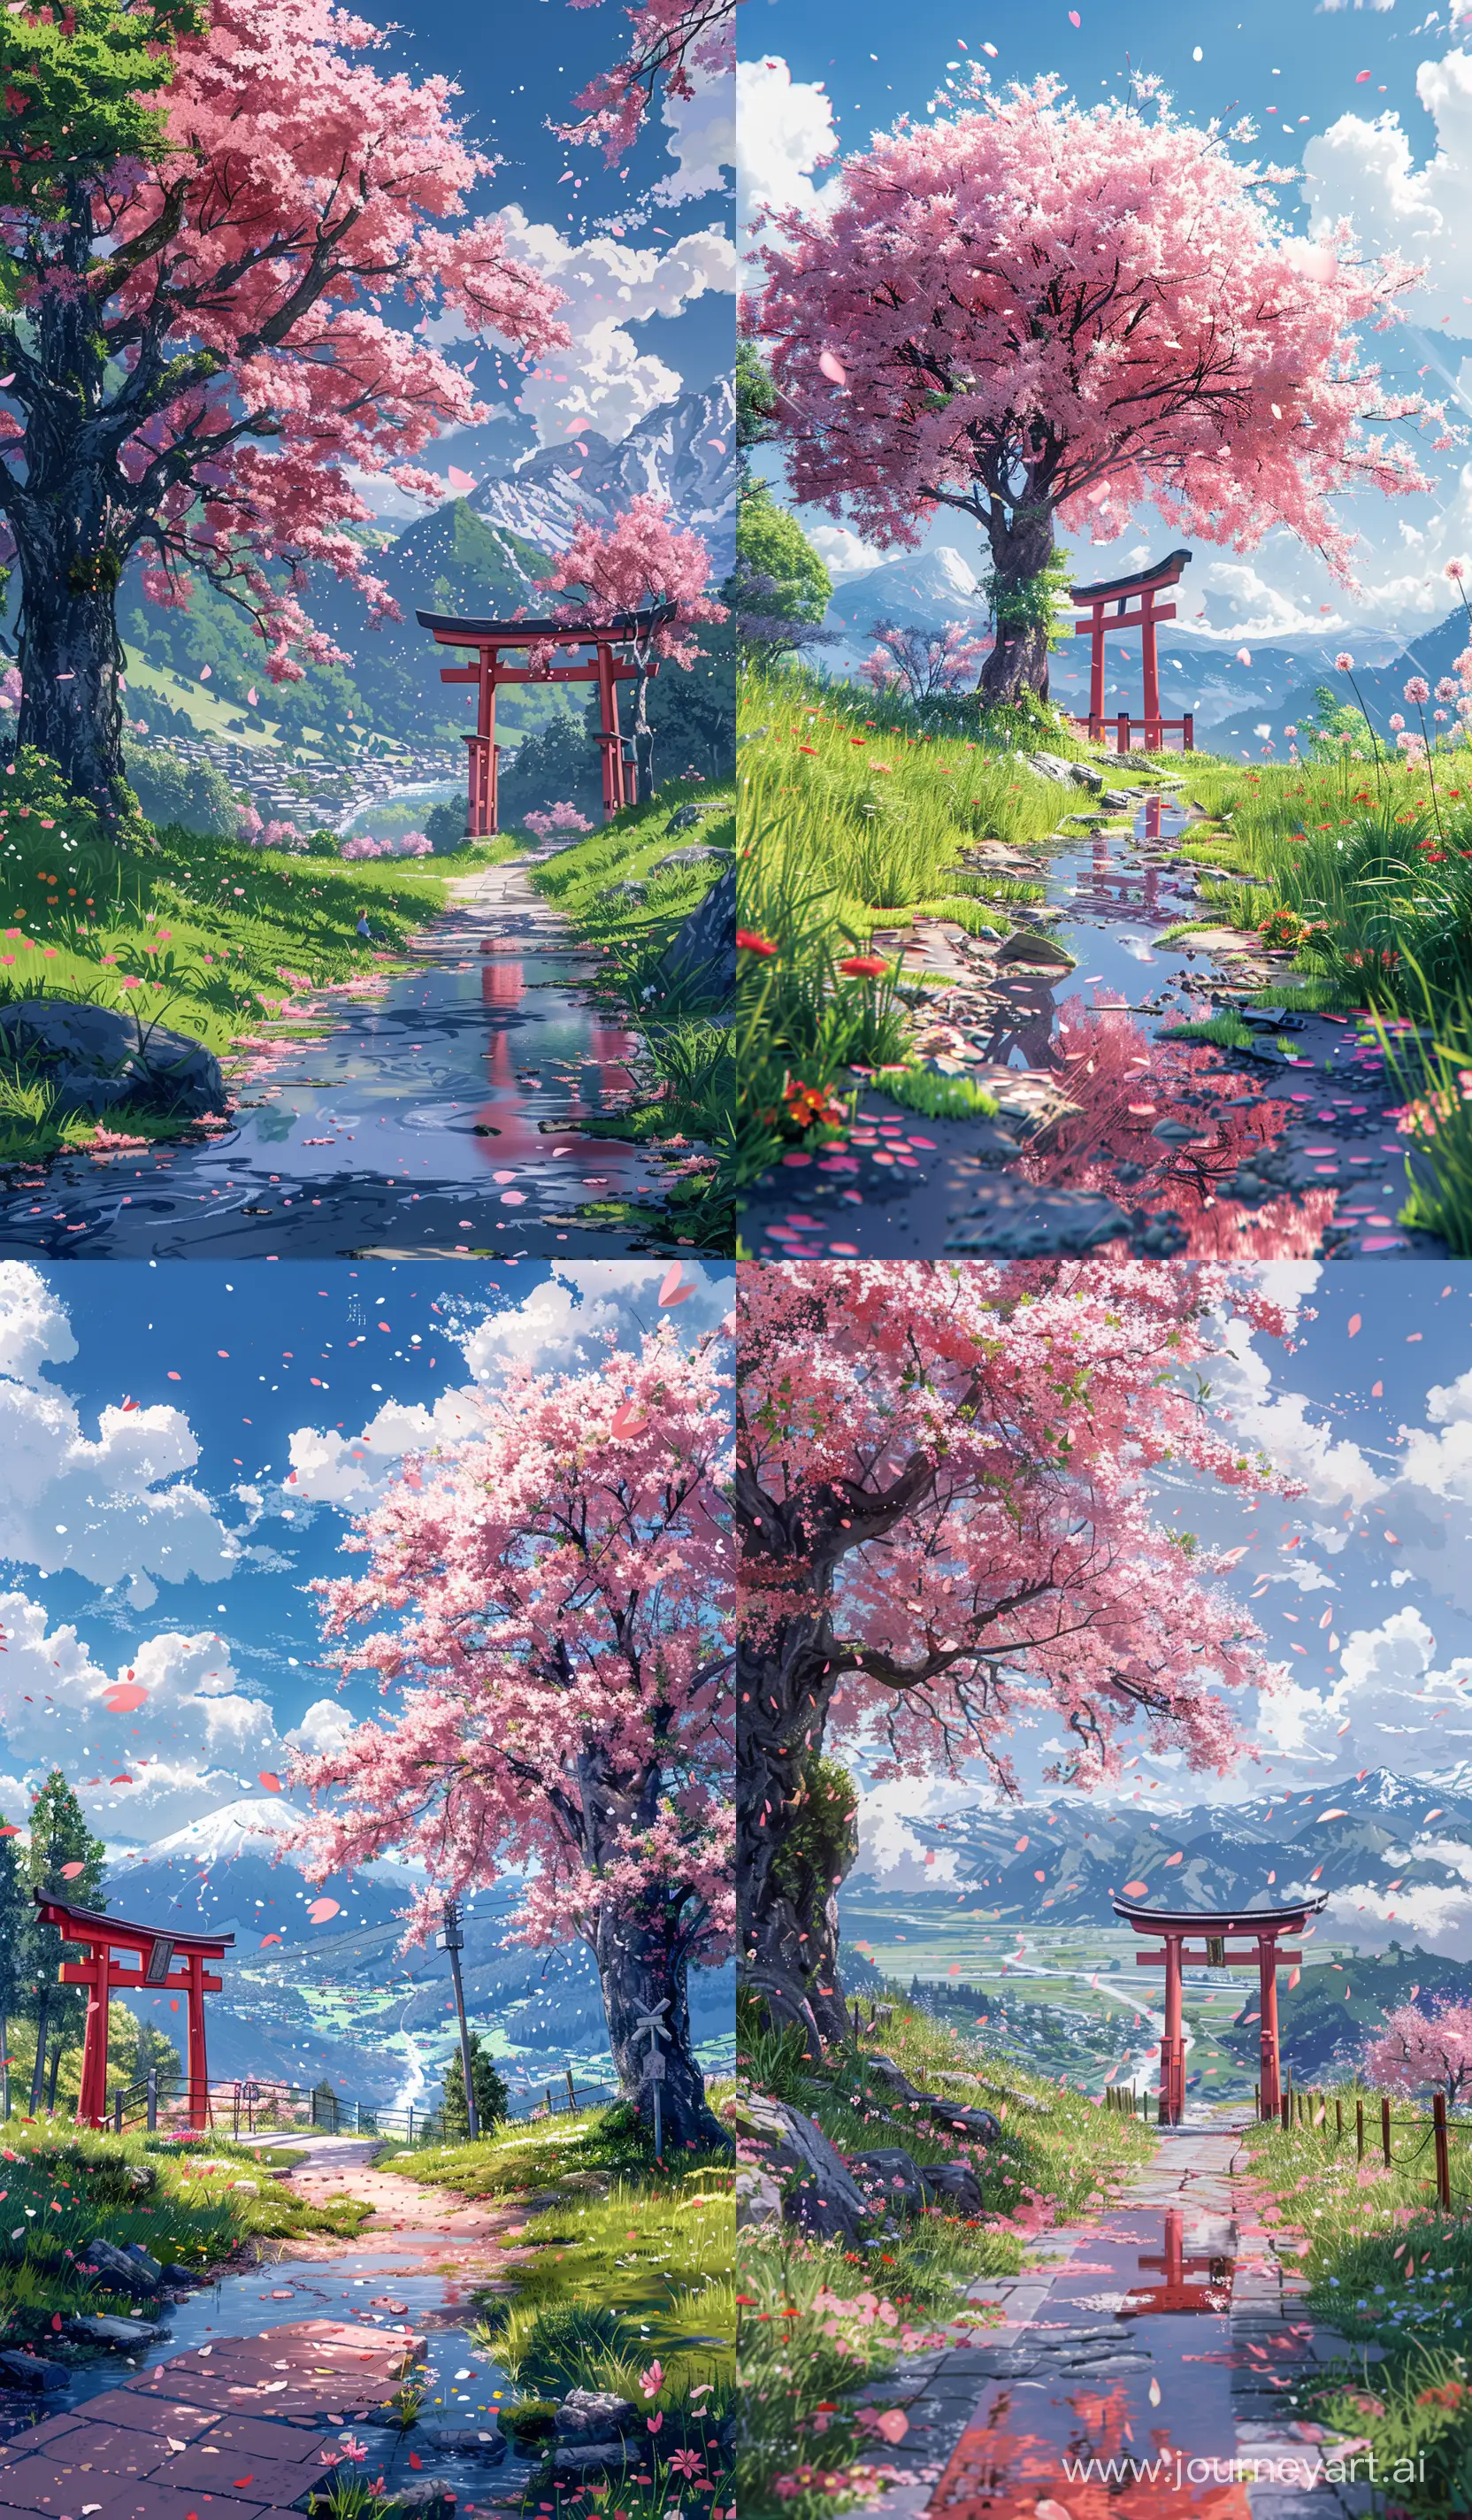 Tranquil-Morning-Stroll-Through-Anime-Countryside-with-Cherry-Blossom-Tree-and-Torii-Gate